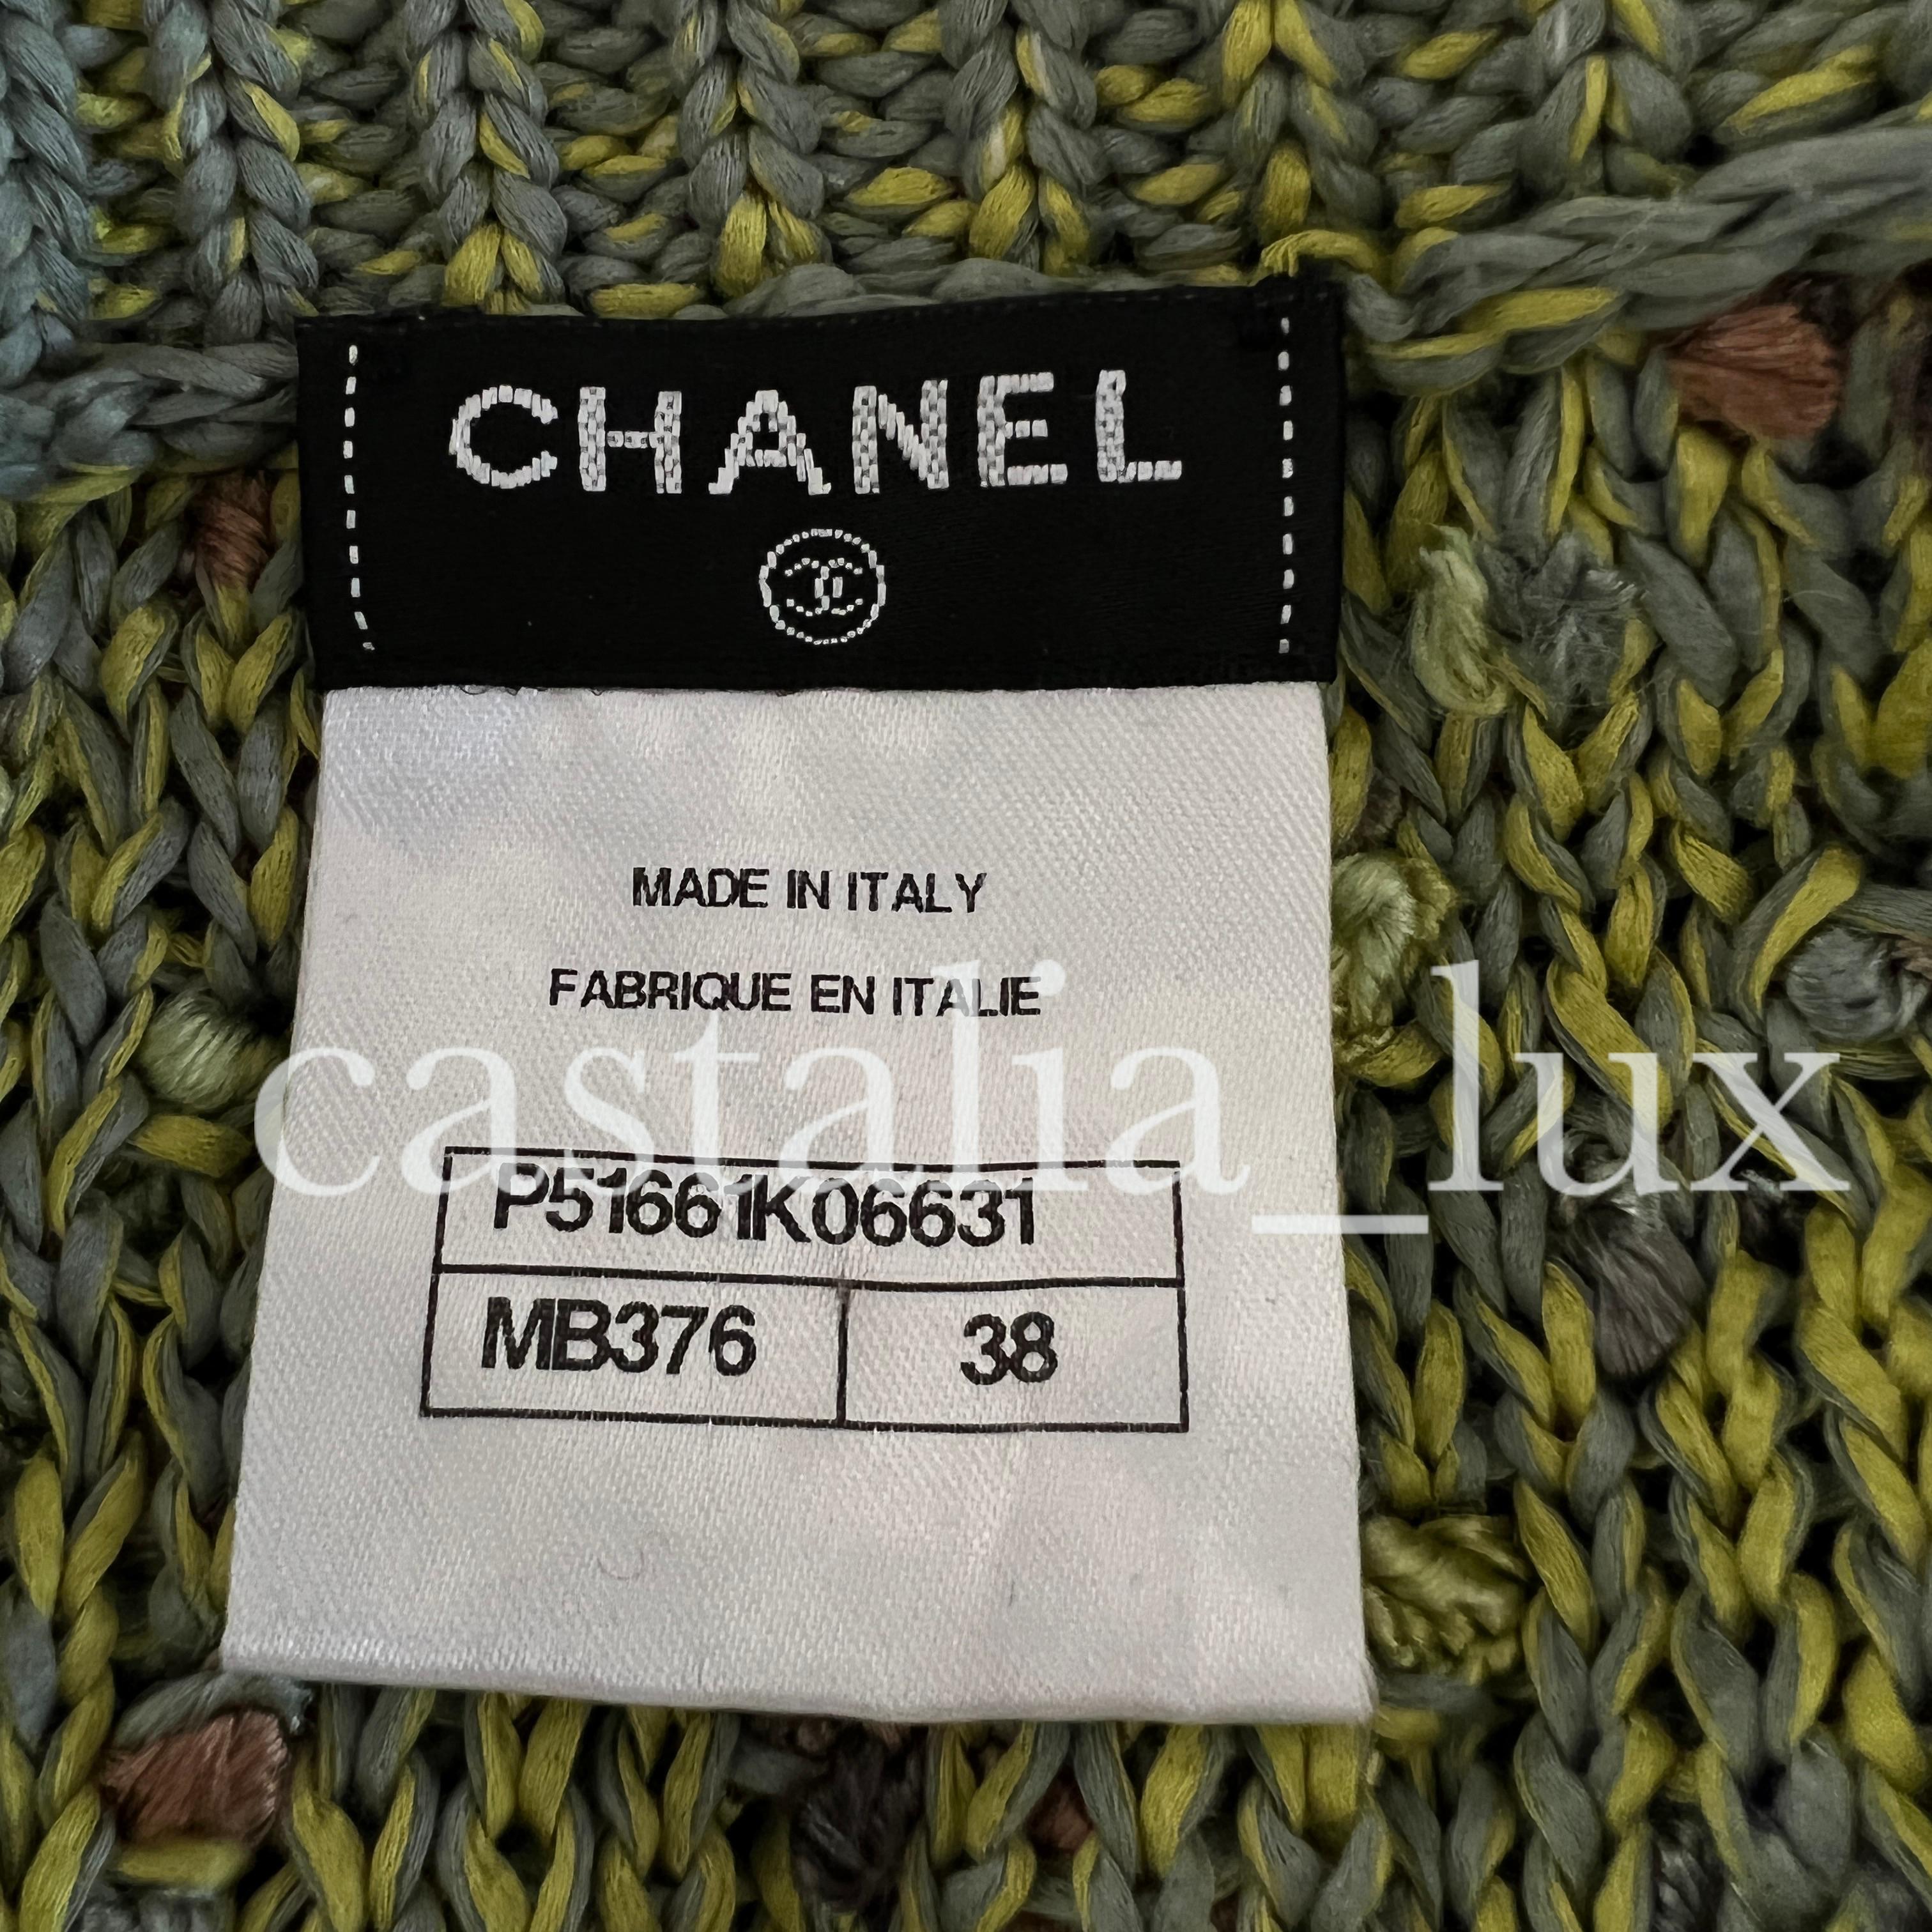 Chanel New Runway Woven Tweed Suit For Sale 10